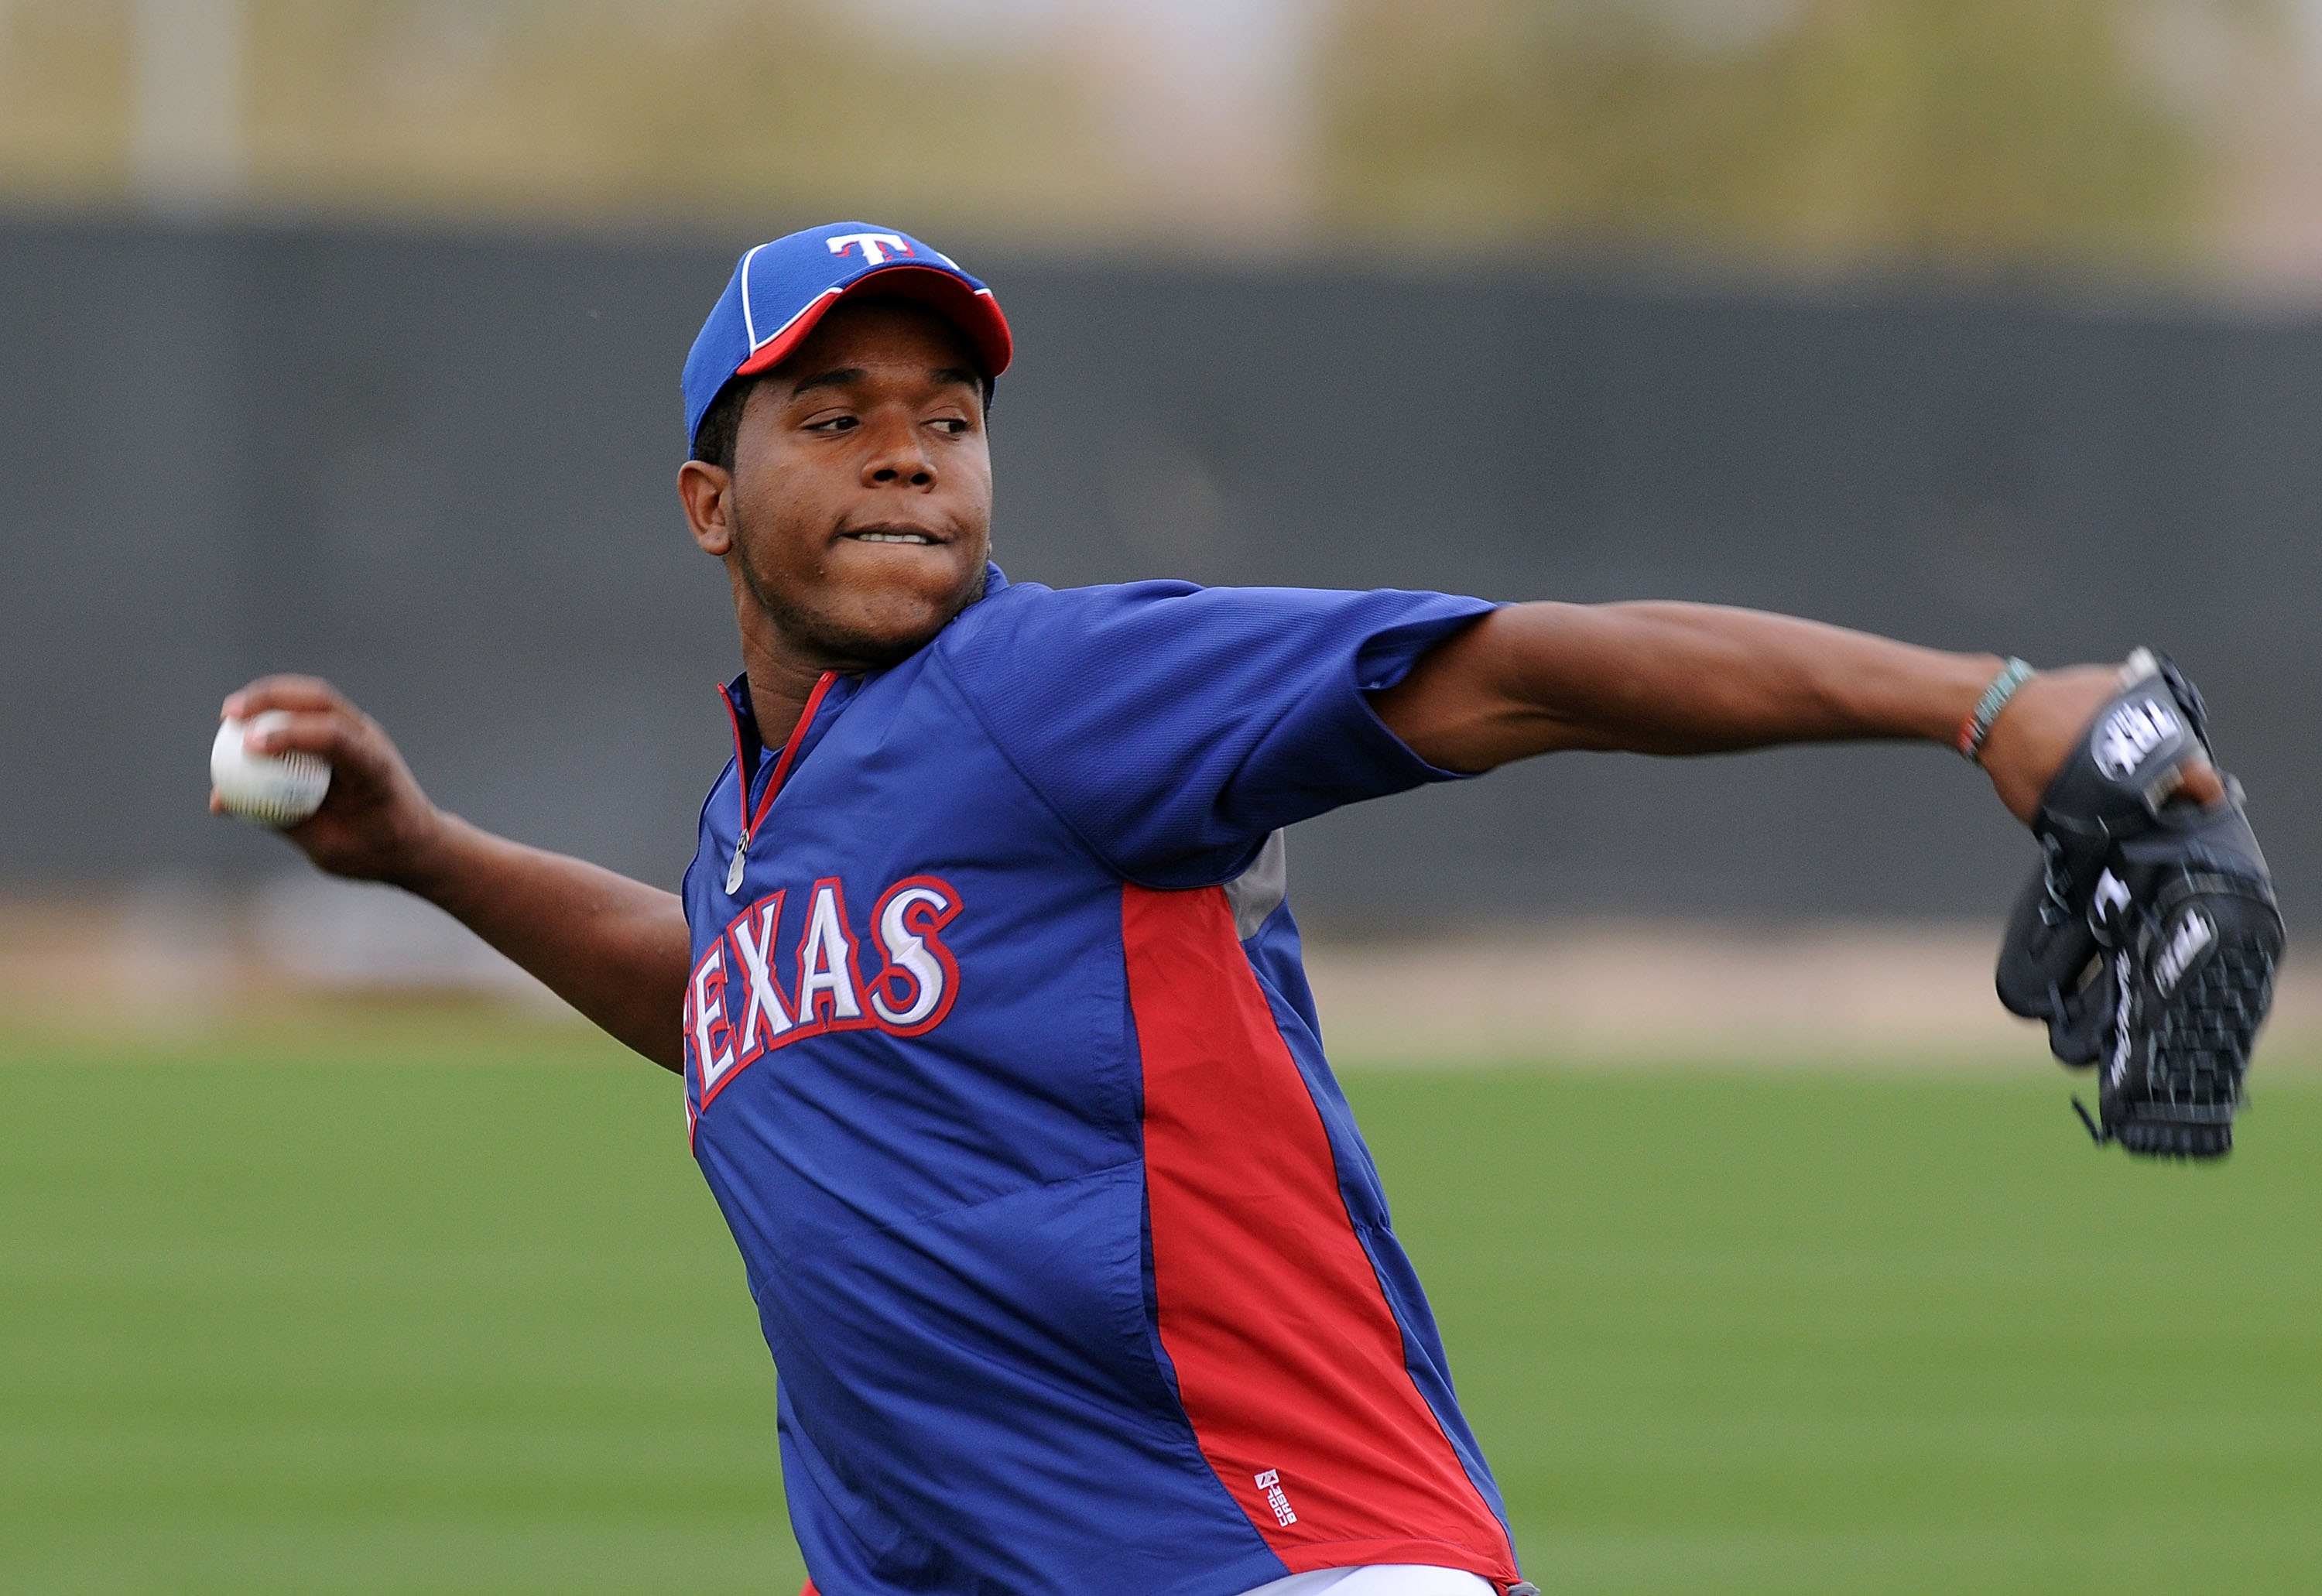 SURPRISE, AZ - FEBRUARY 18:  Neftali Feliz #30 of the Texas Rangers warms up prior to spring workouts at Surprise Stadium on February 18, 2011 in Surprise, Arizona.  (Photo by Norm Hall/Getty Images)